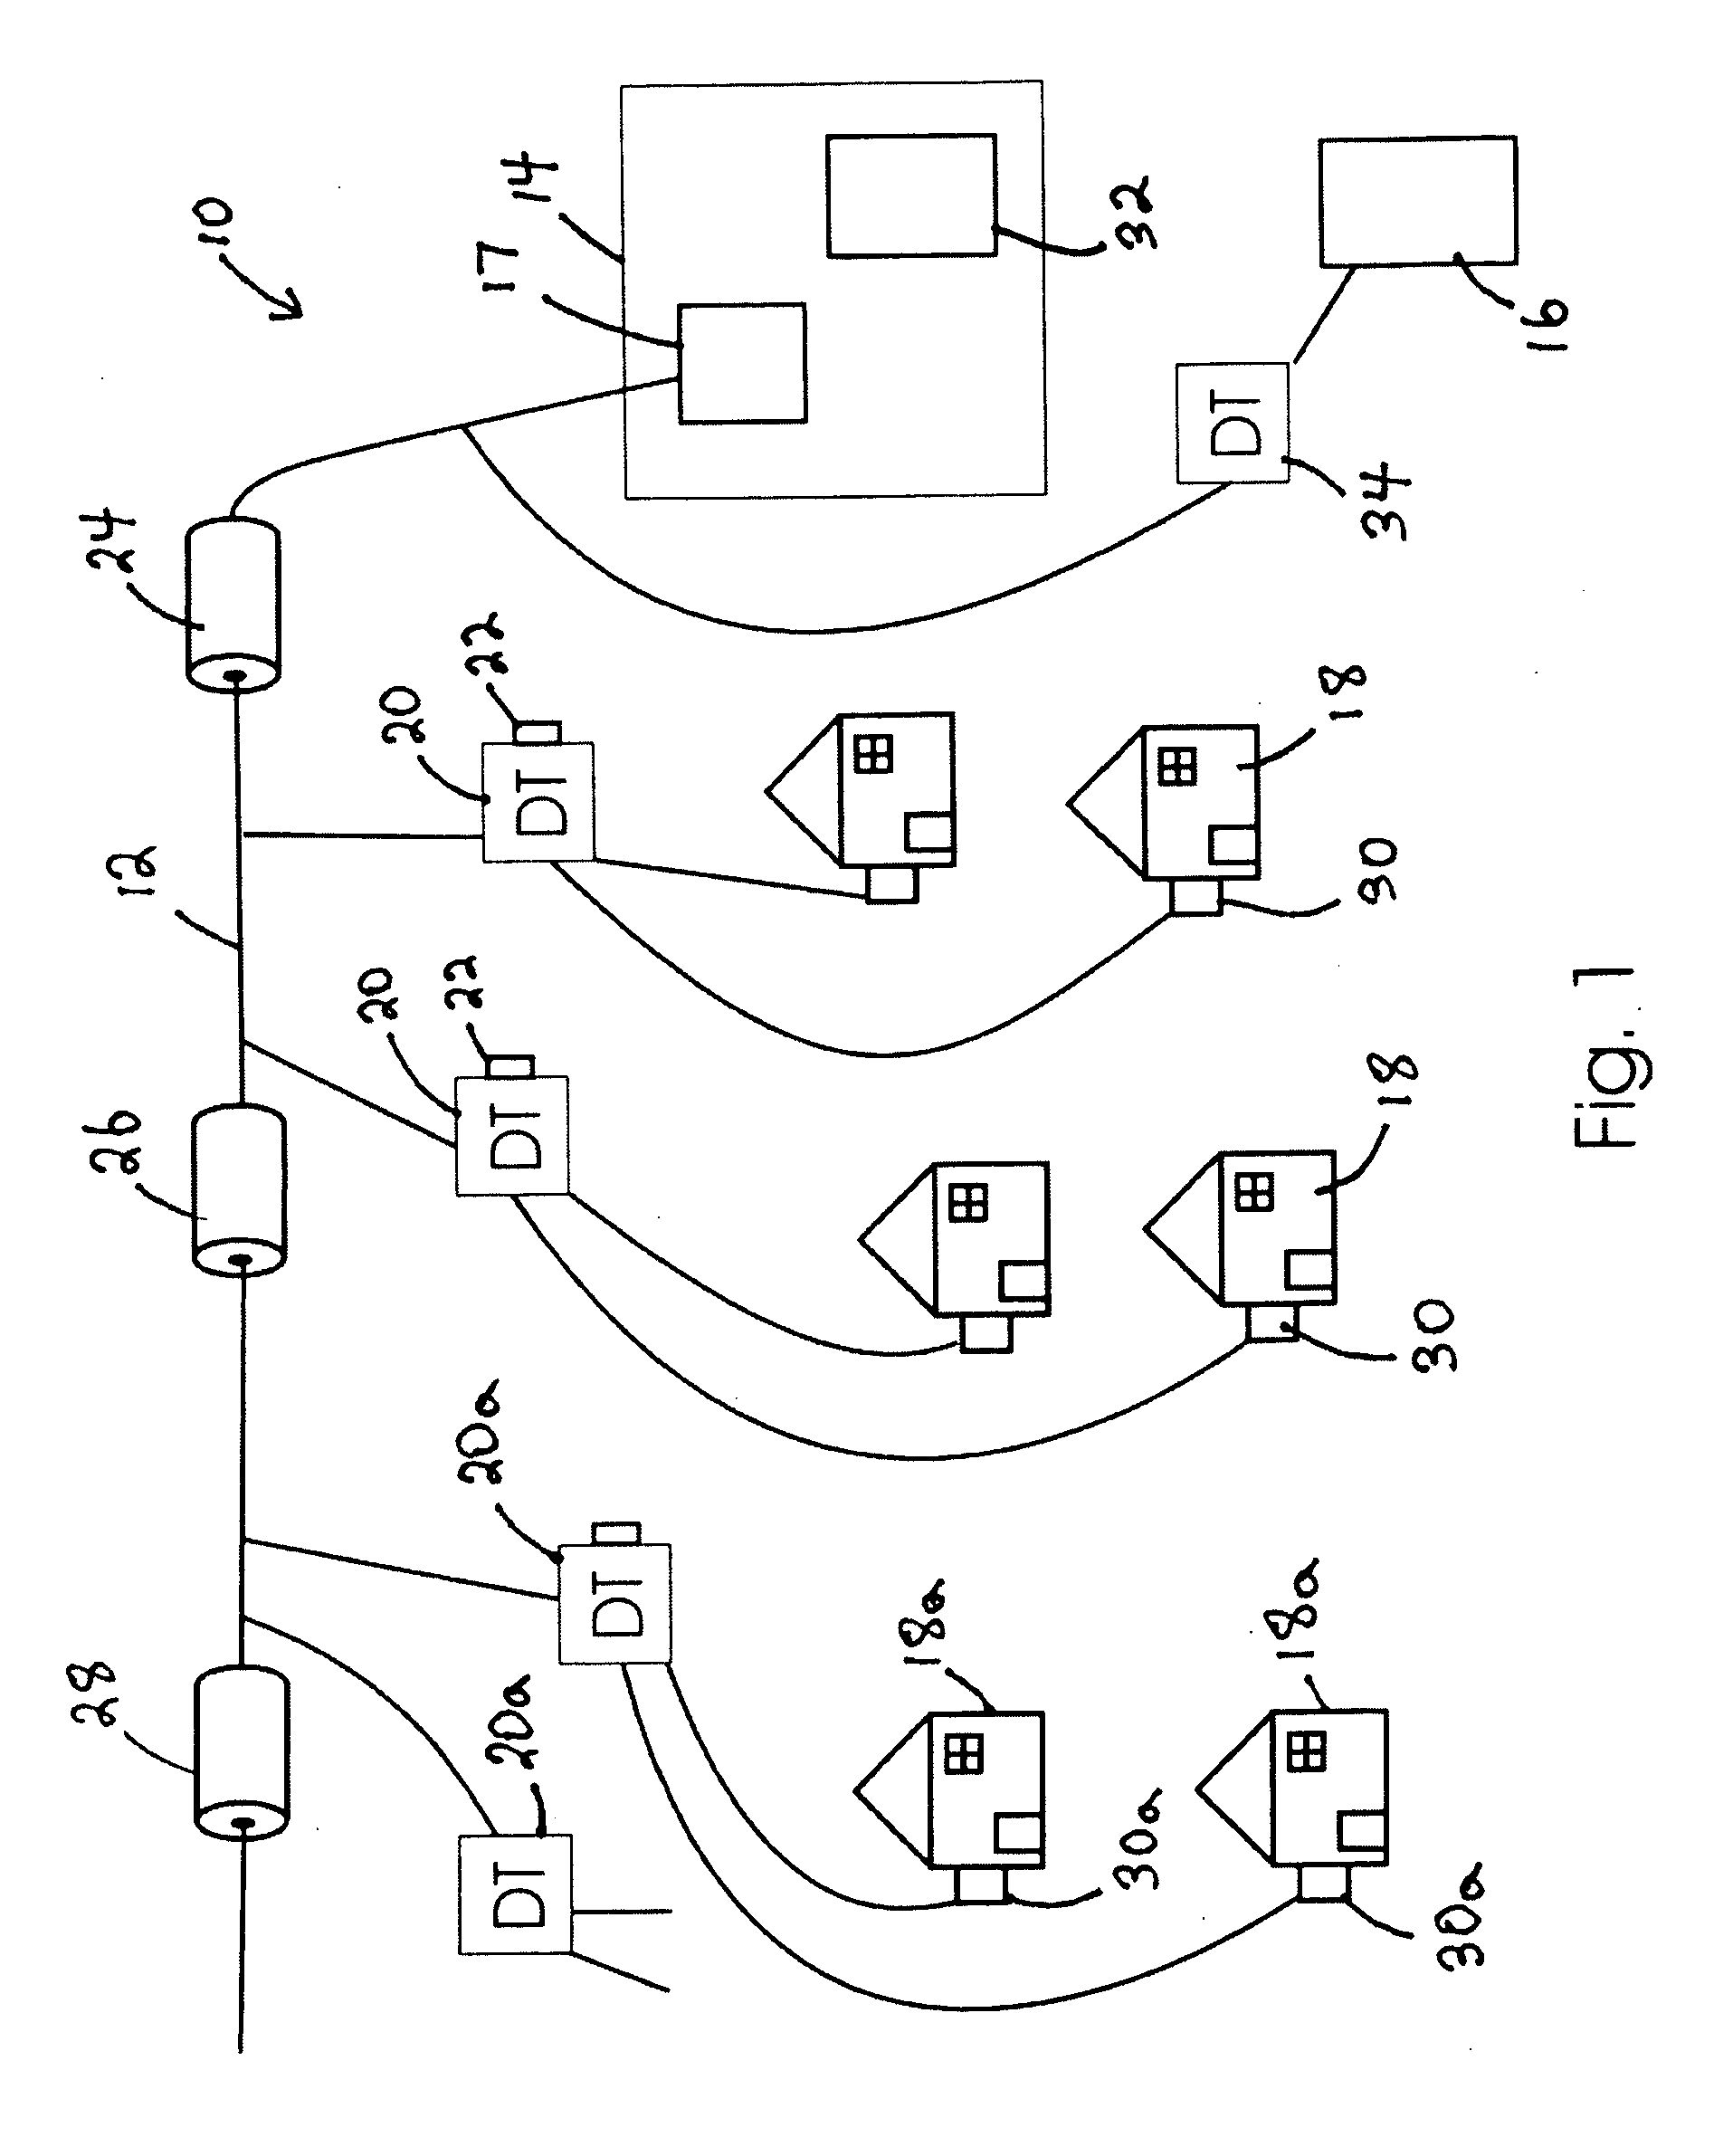 System for Accurately Detecting Electricity Theft